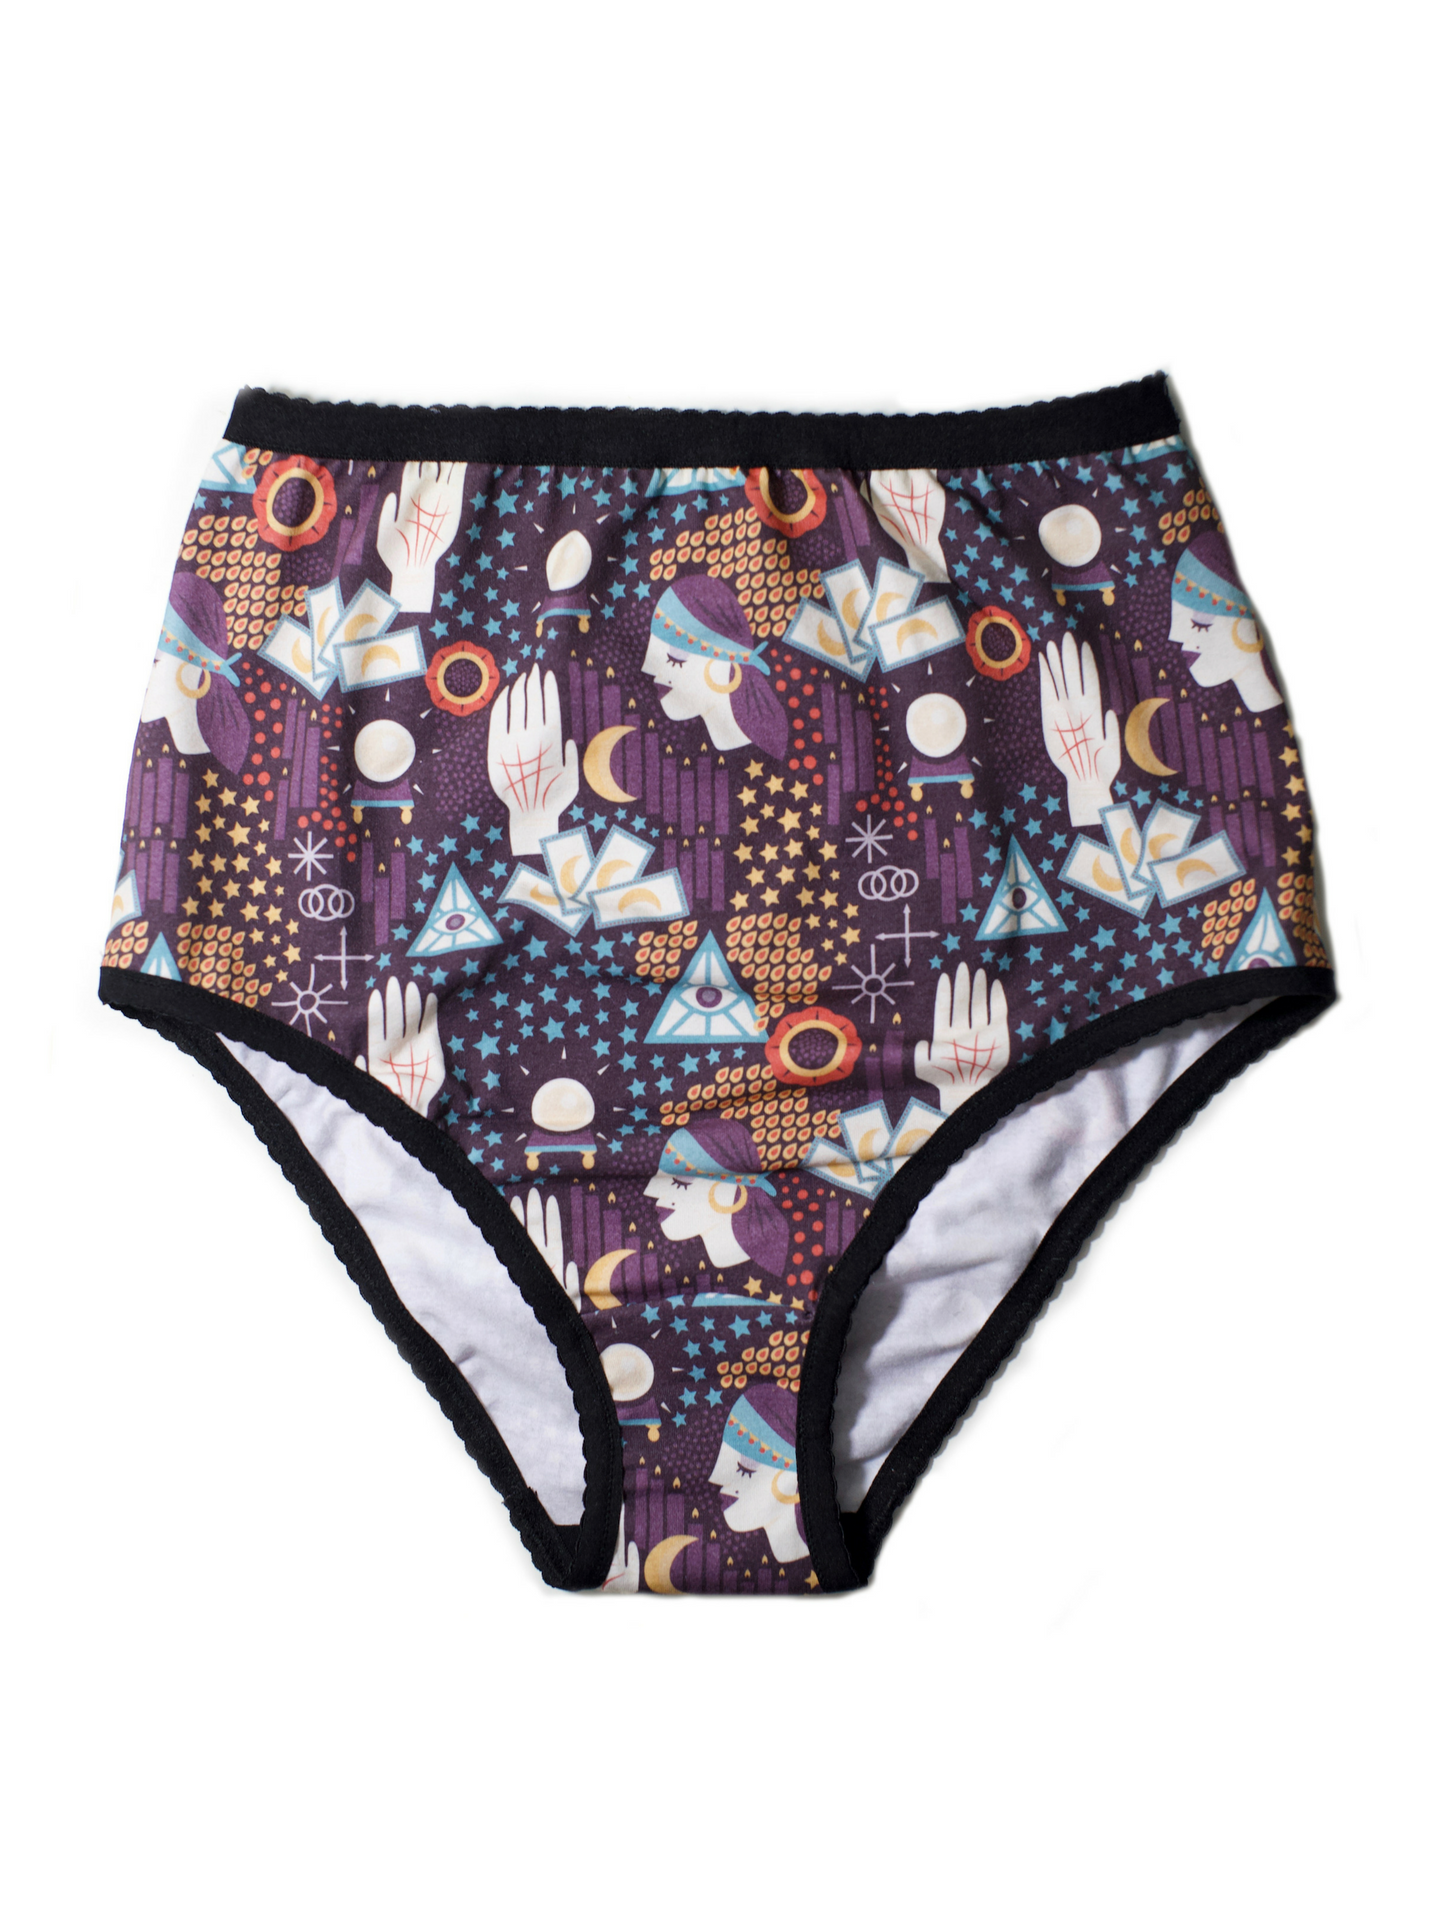 Tarot High-waist Brief by Coven Intimates | Finding Rosie